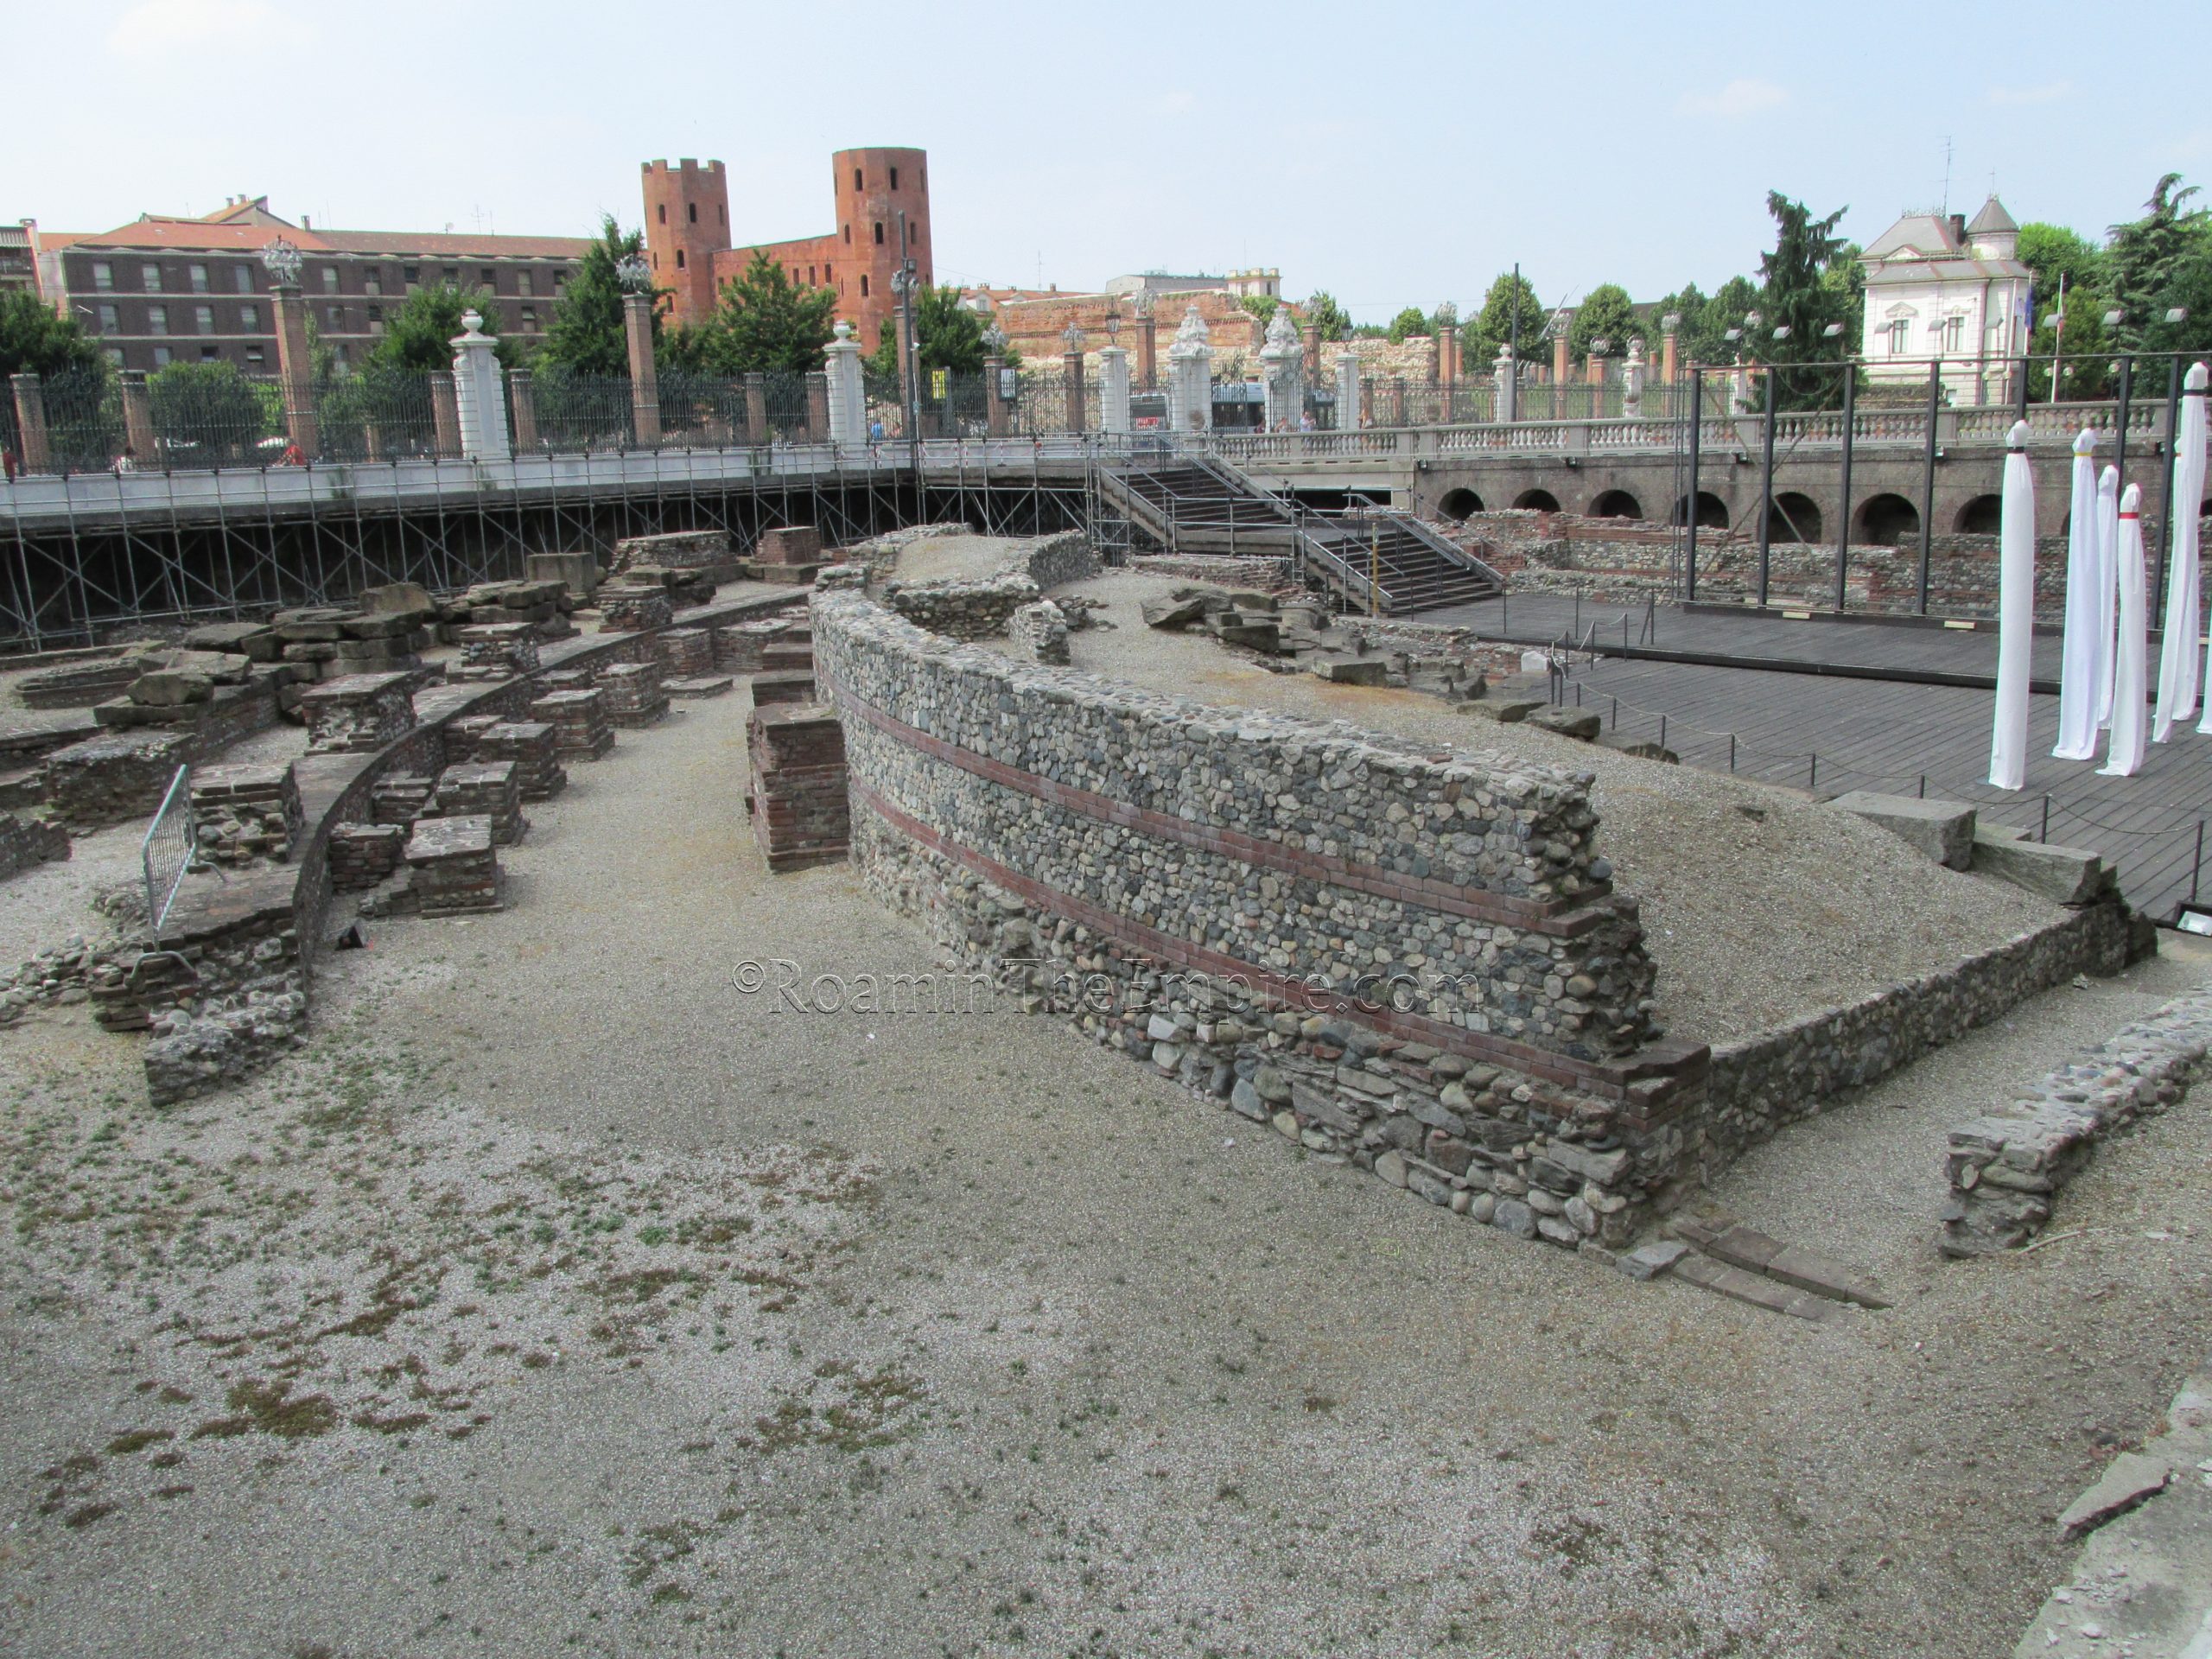 Theater and Porta Palatina in the background.